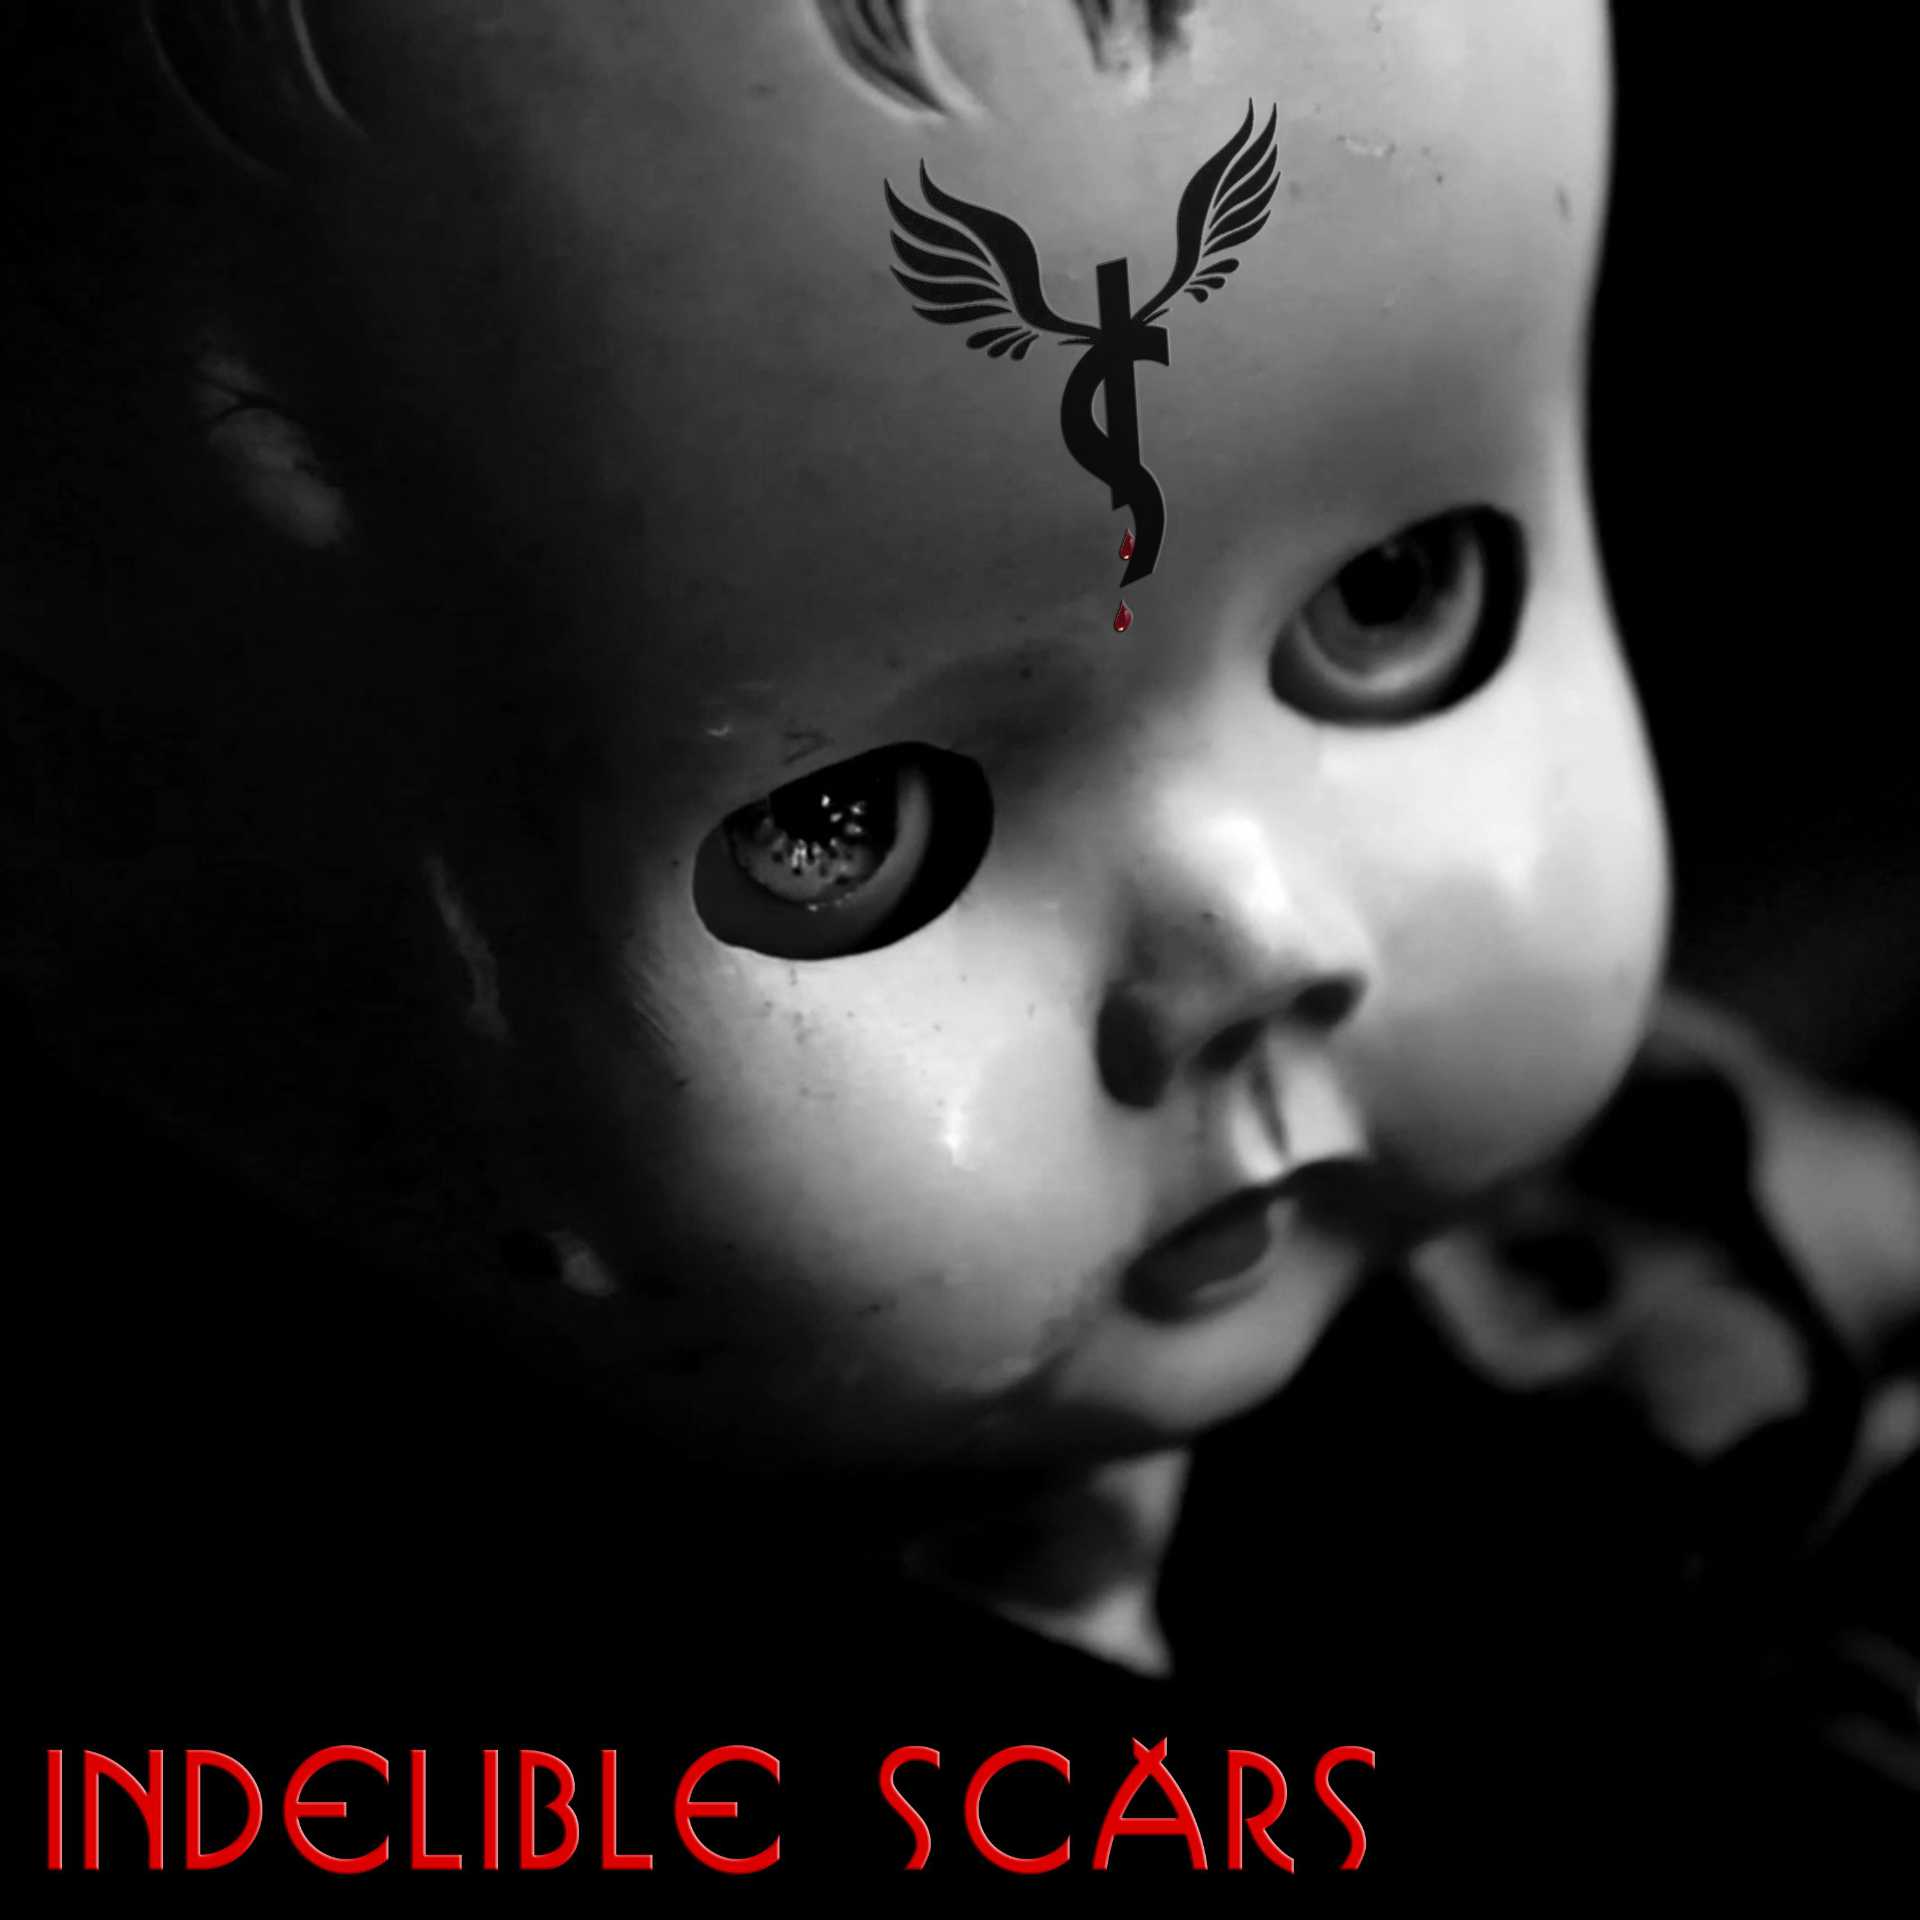 indelible scars can you be sure cruel to be kind